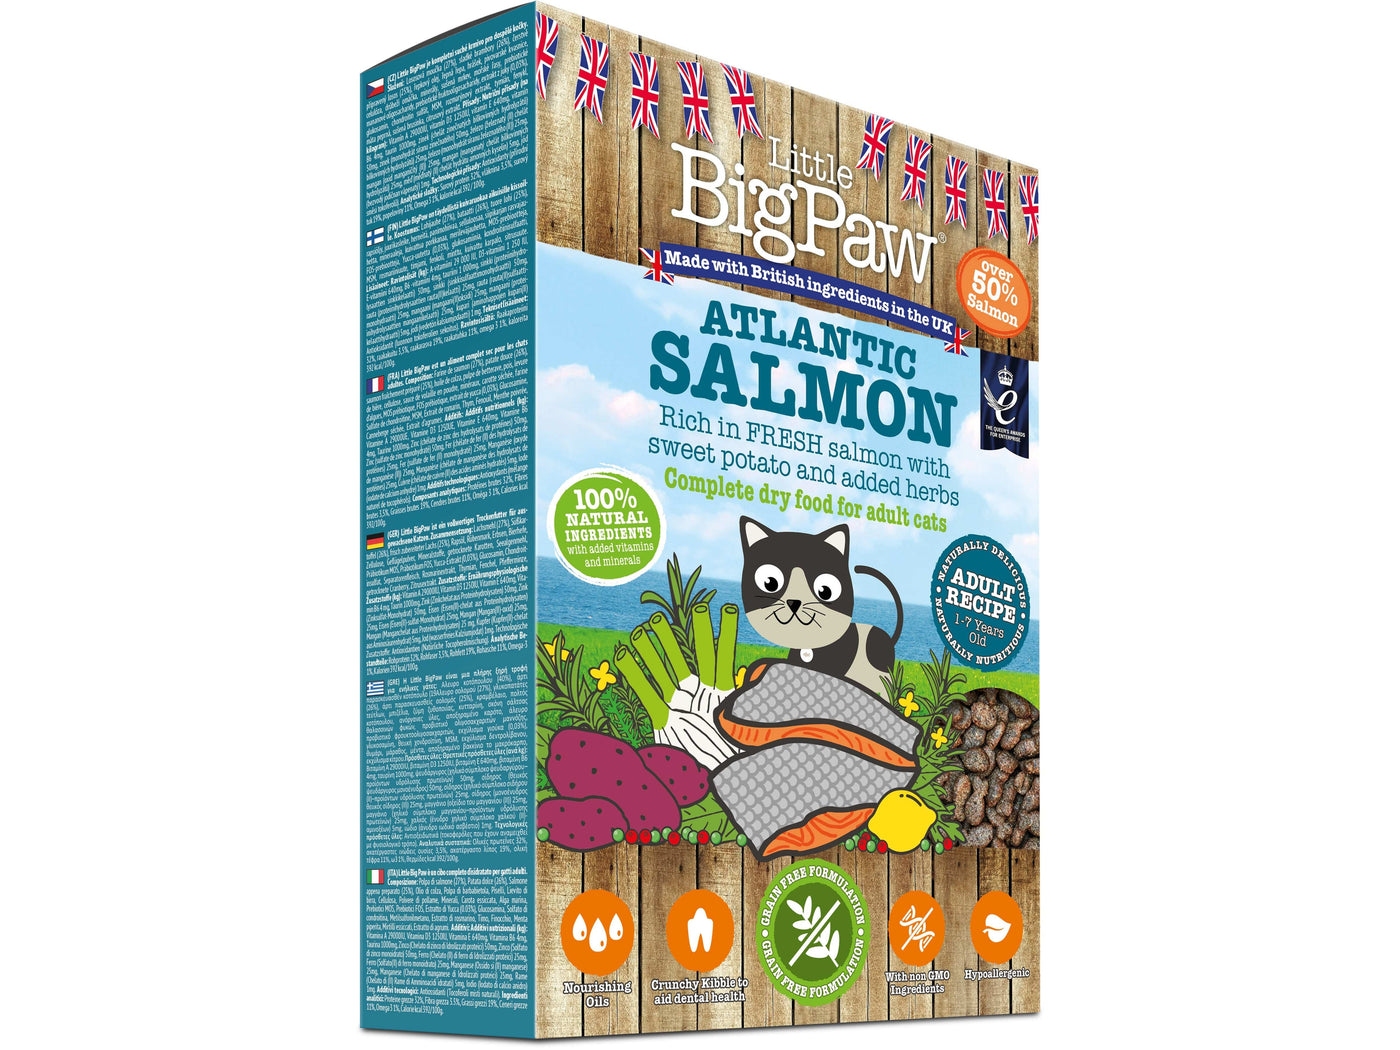 Atlantic Salmon Complete dry food for Adult Cats 350gm /Little BigPaw